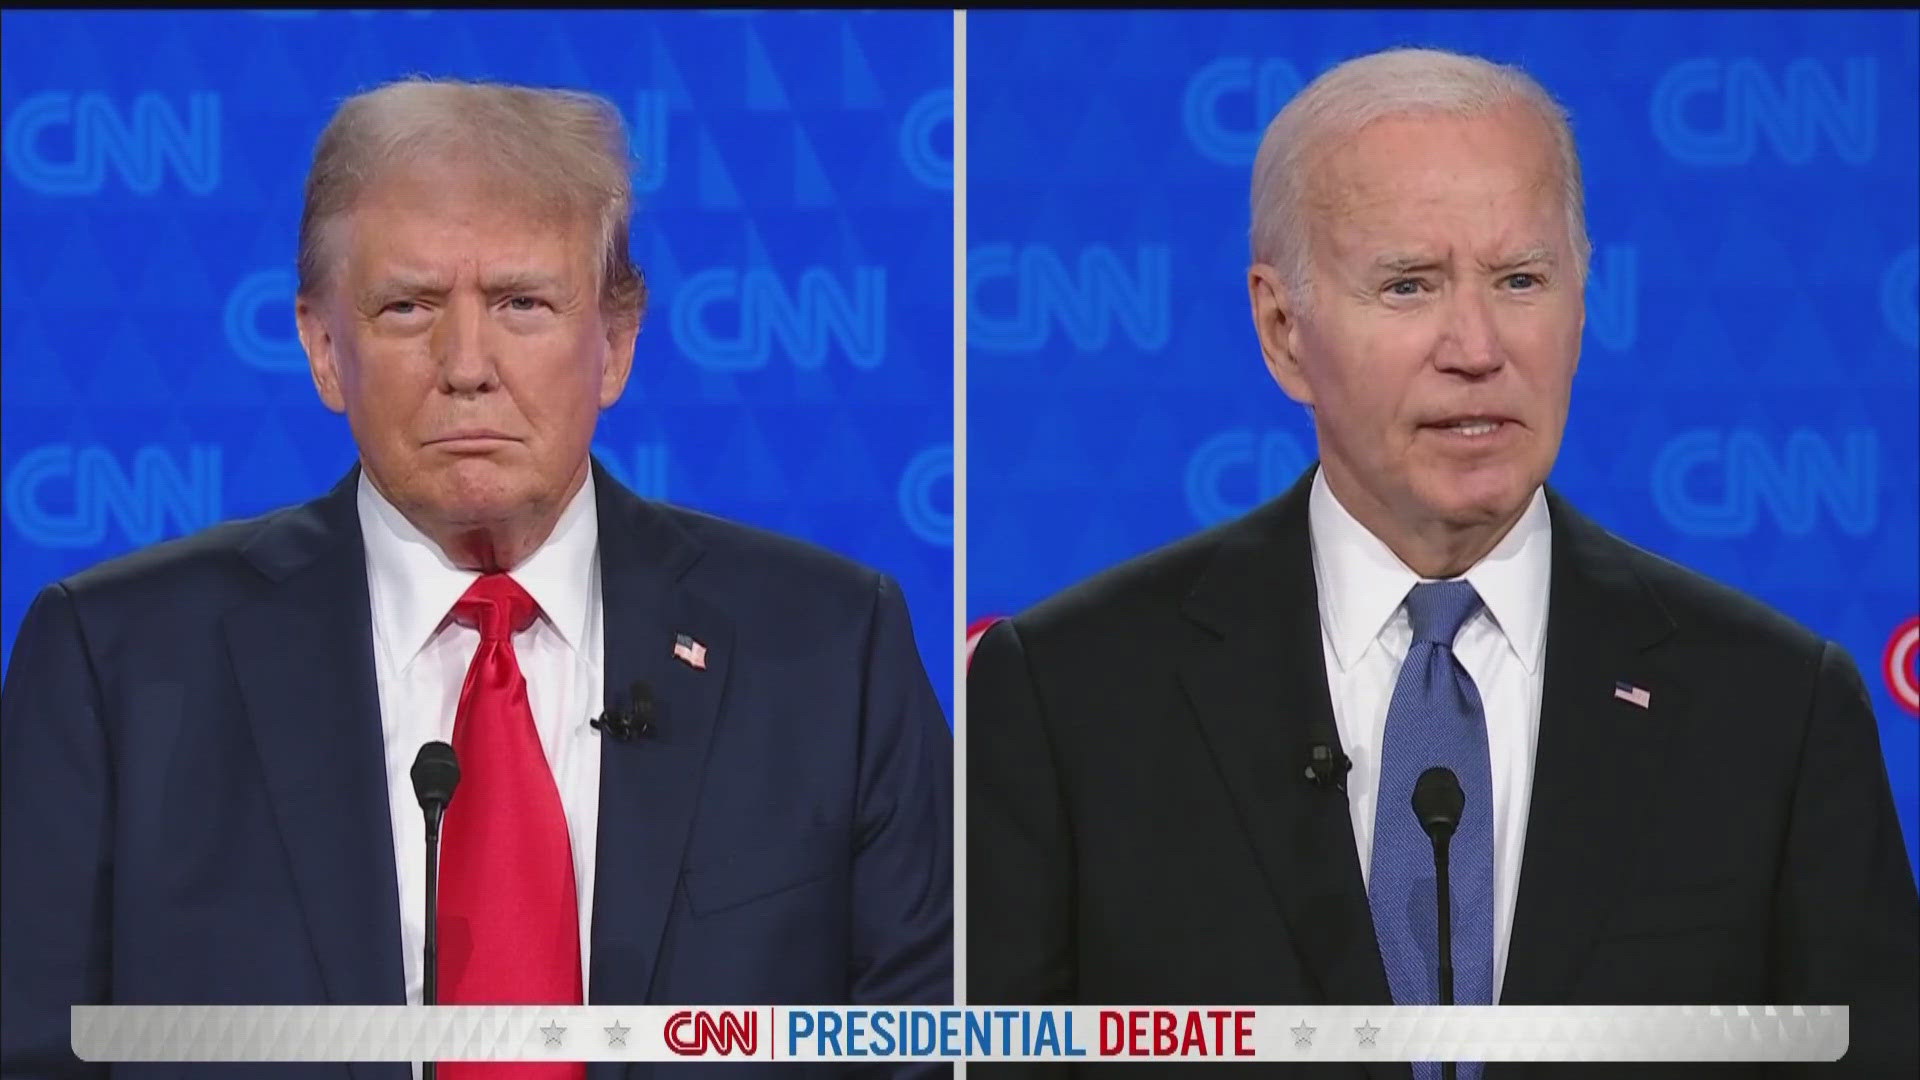 Some Democrats are concerns over President Biden's performance during last night's debate. Some are pondering whether he should be the nominee for this election.